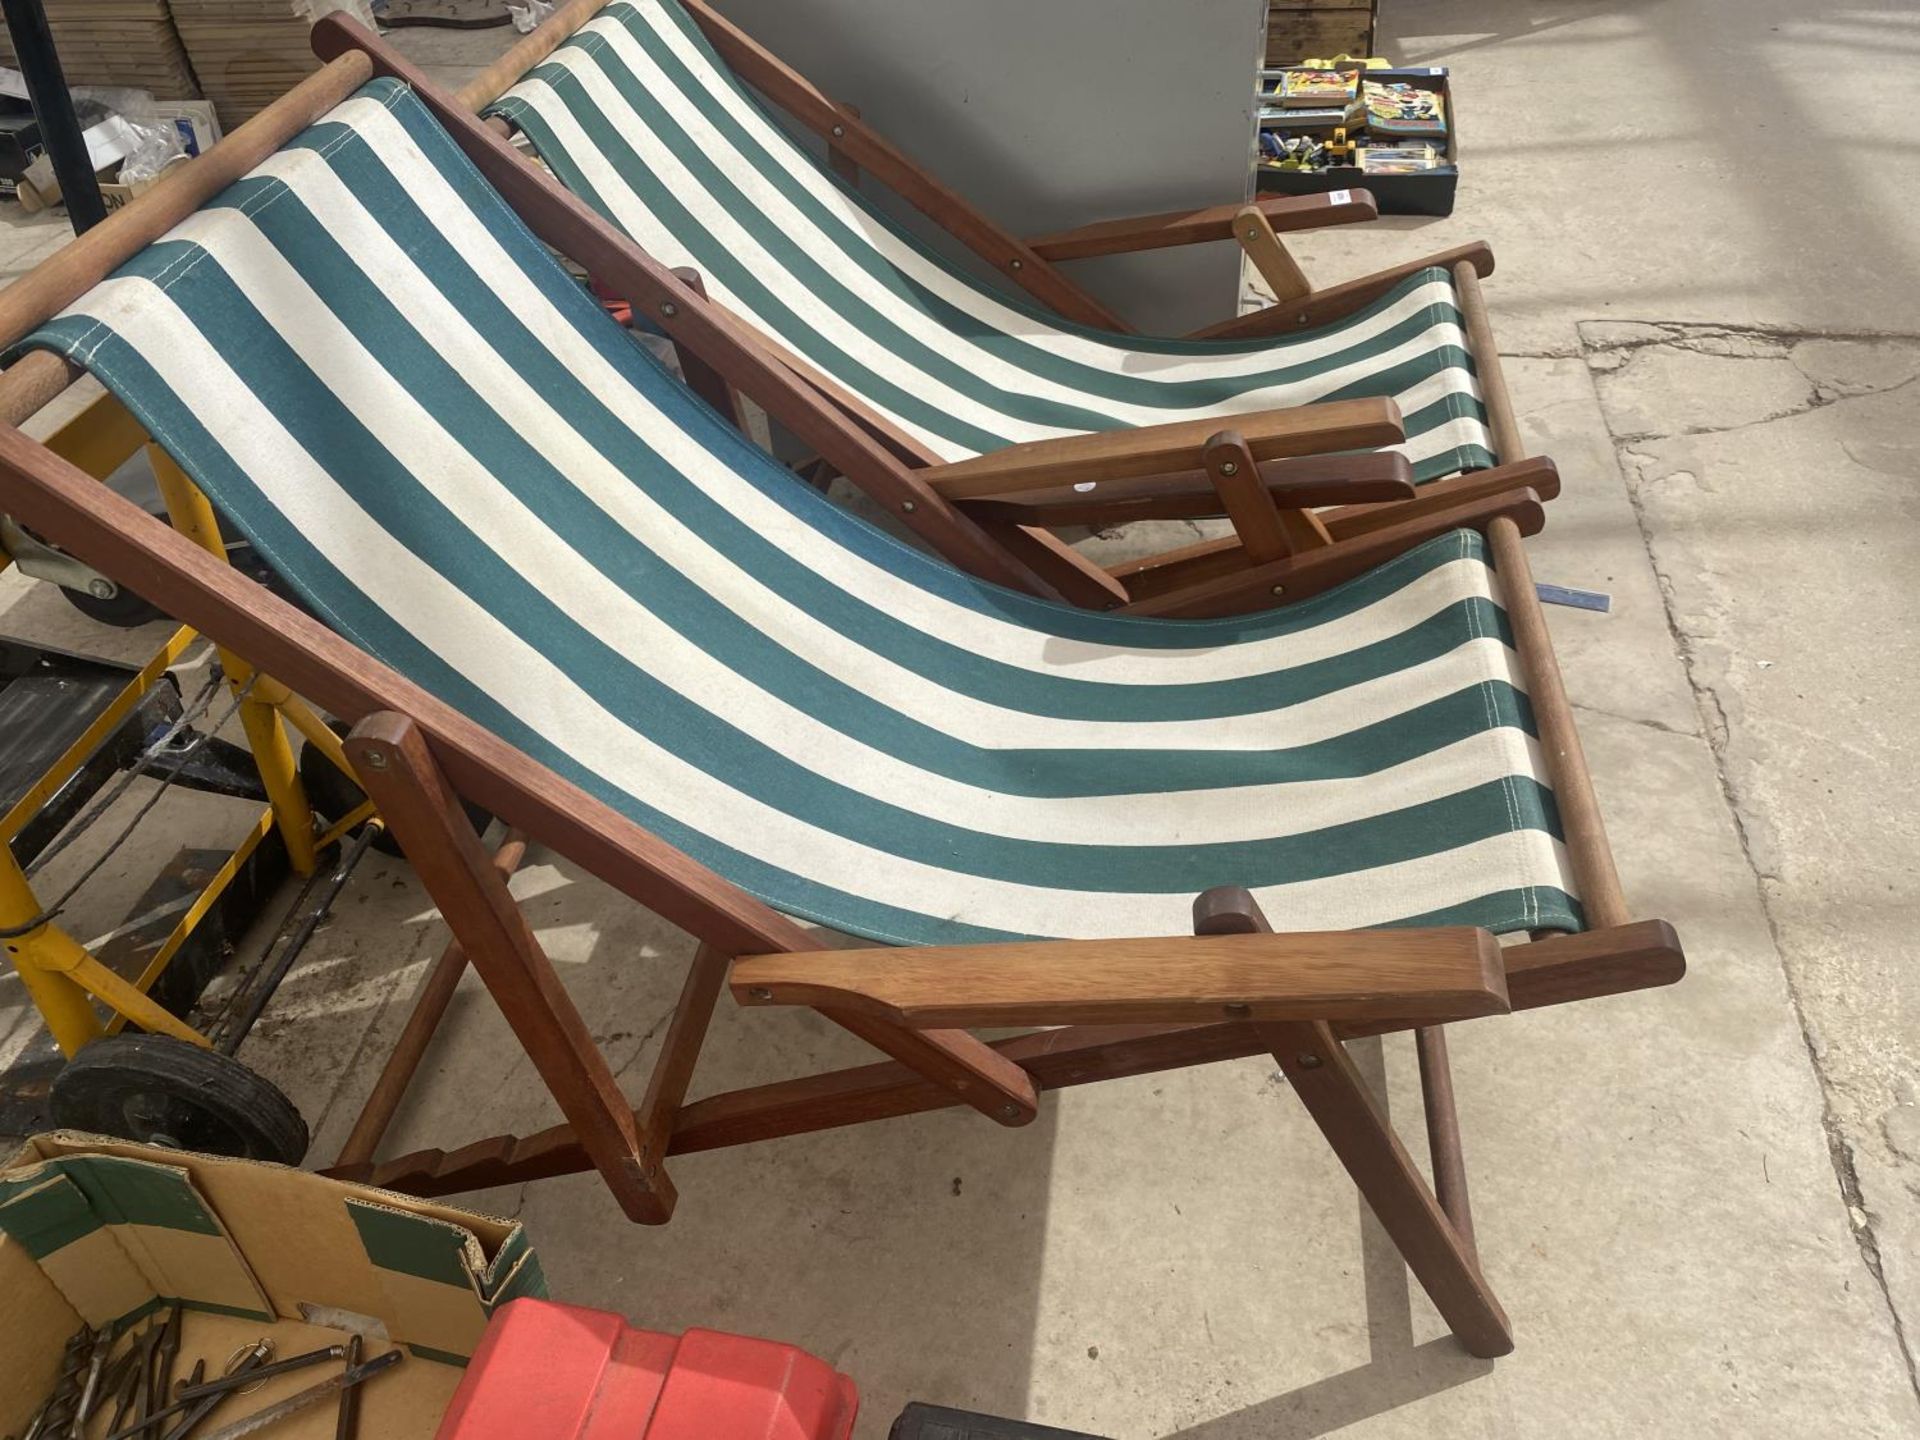 A PAIR OF WOODEN FRAMED DECK CHAIRS - Image 2 of 3